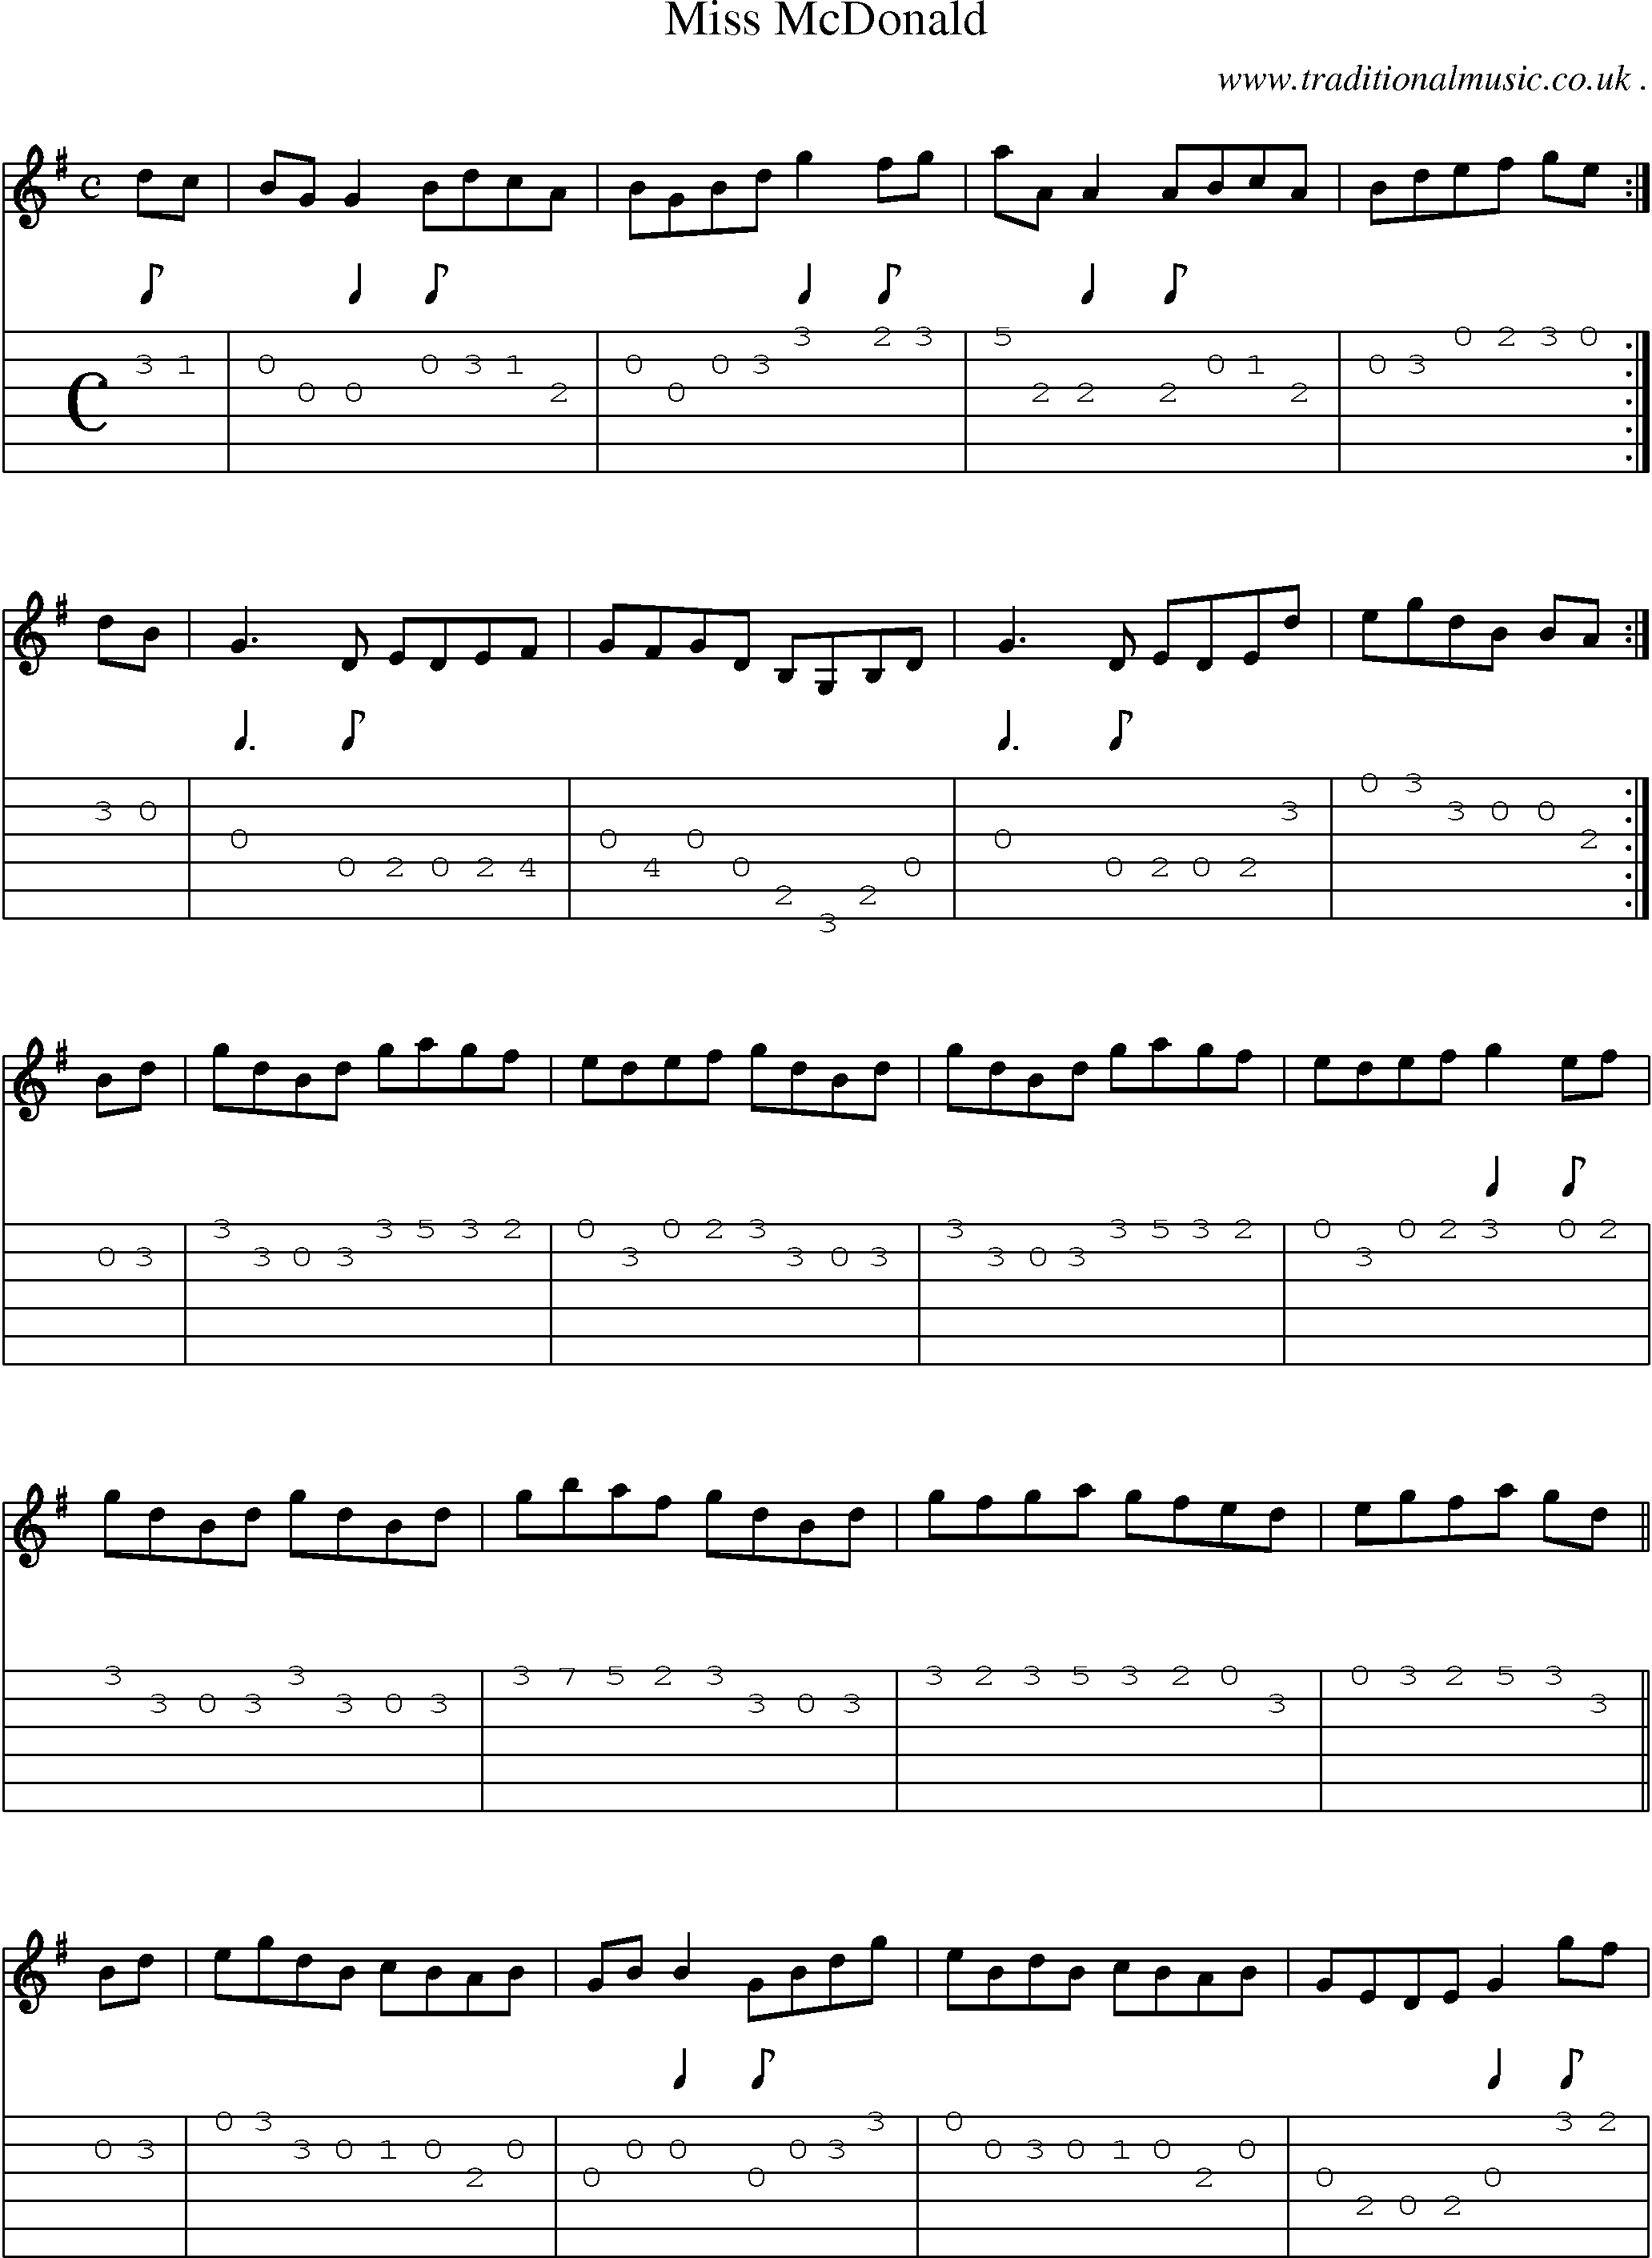 Sheet-Music and Guitar Tabs for Miss Mcdonald